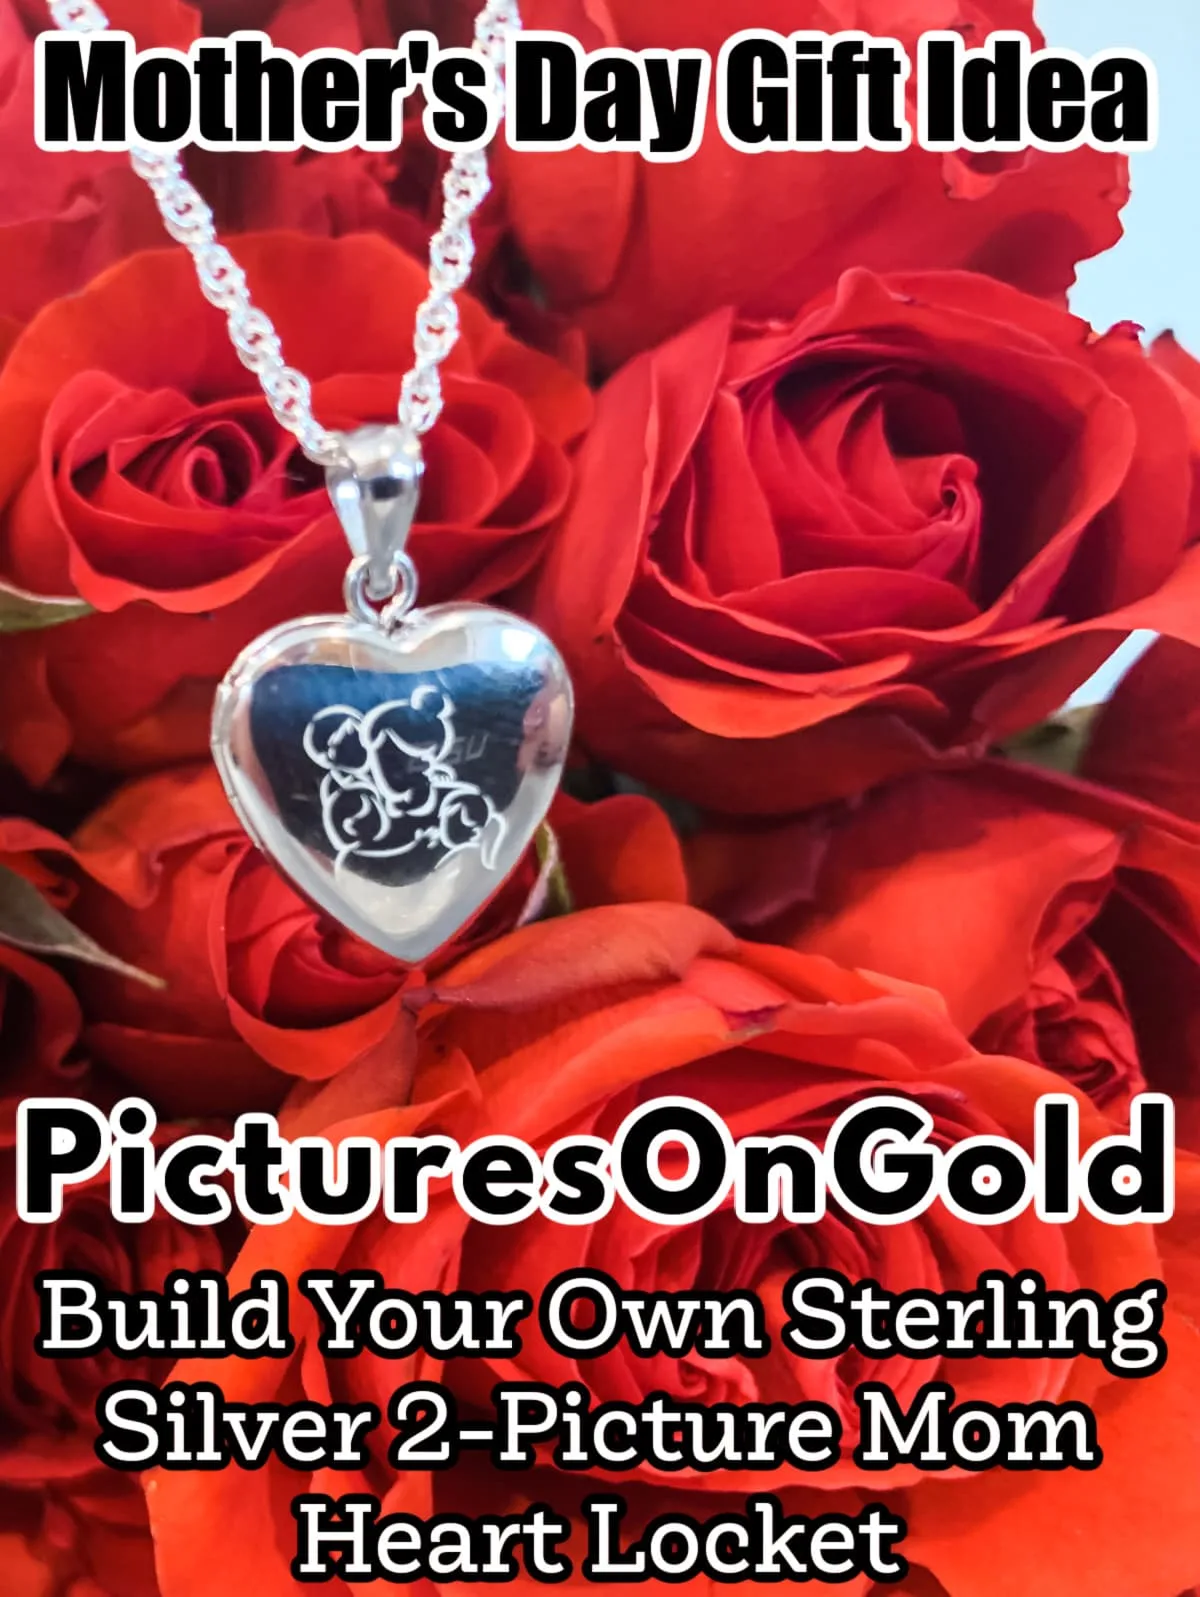 locket and roses - Pictures On Gold Mother's Day Giveaway - Build Your Own Sterling Silver 2-Picture Mom Heart Locket